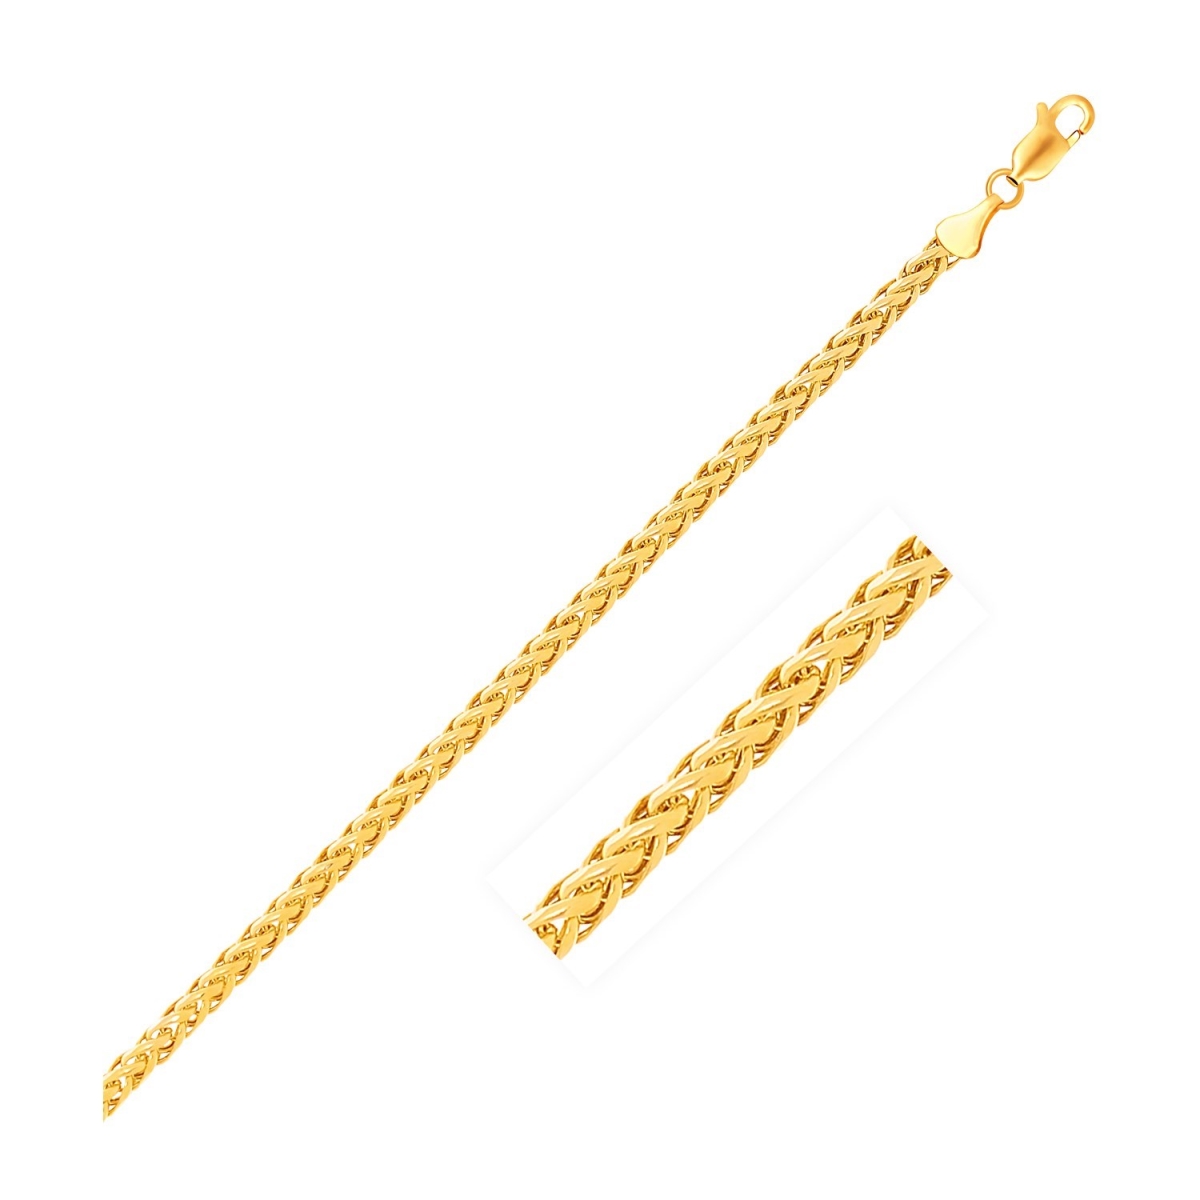 D91420604-24 4.1 Mm 14k Yellow Gold Diamond Cut Round Franco Chain - Size 24 In.